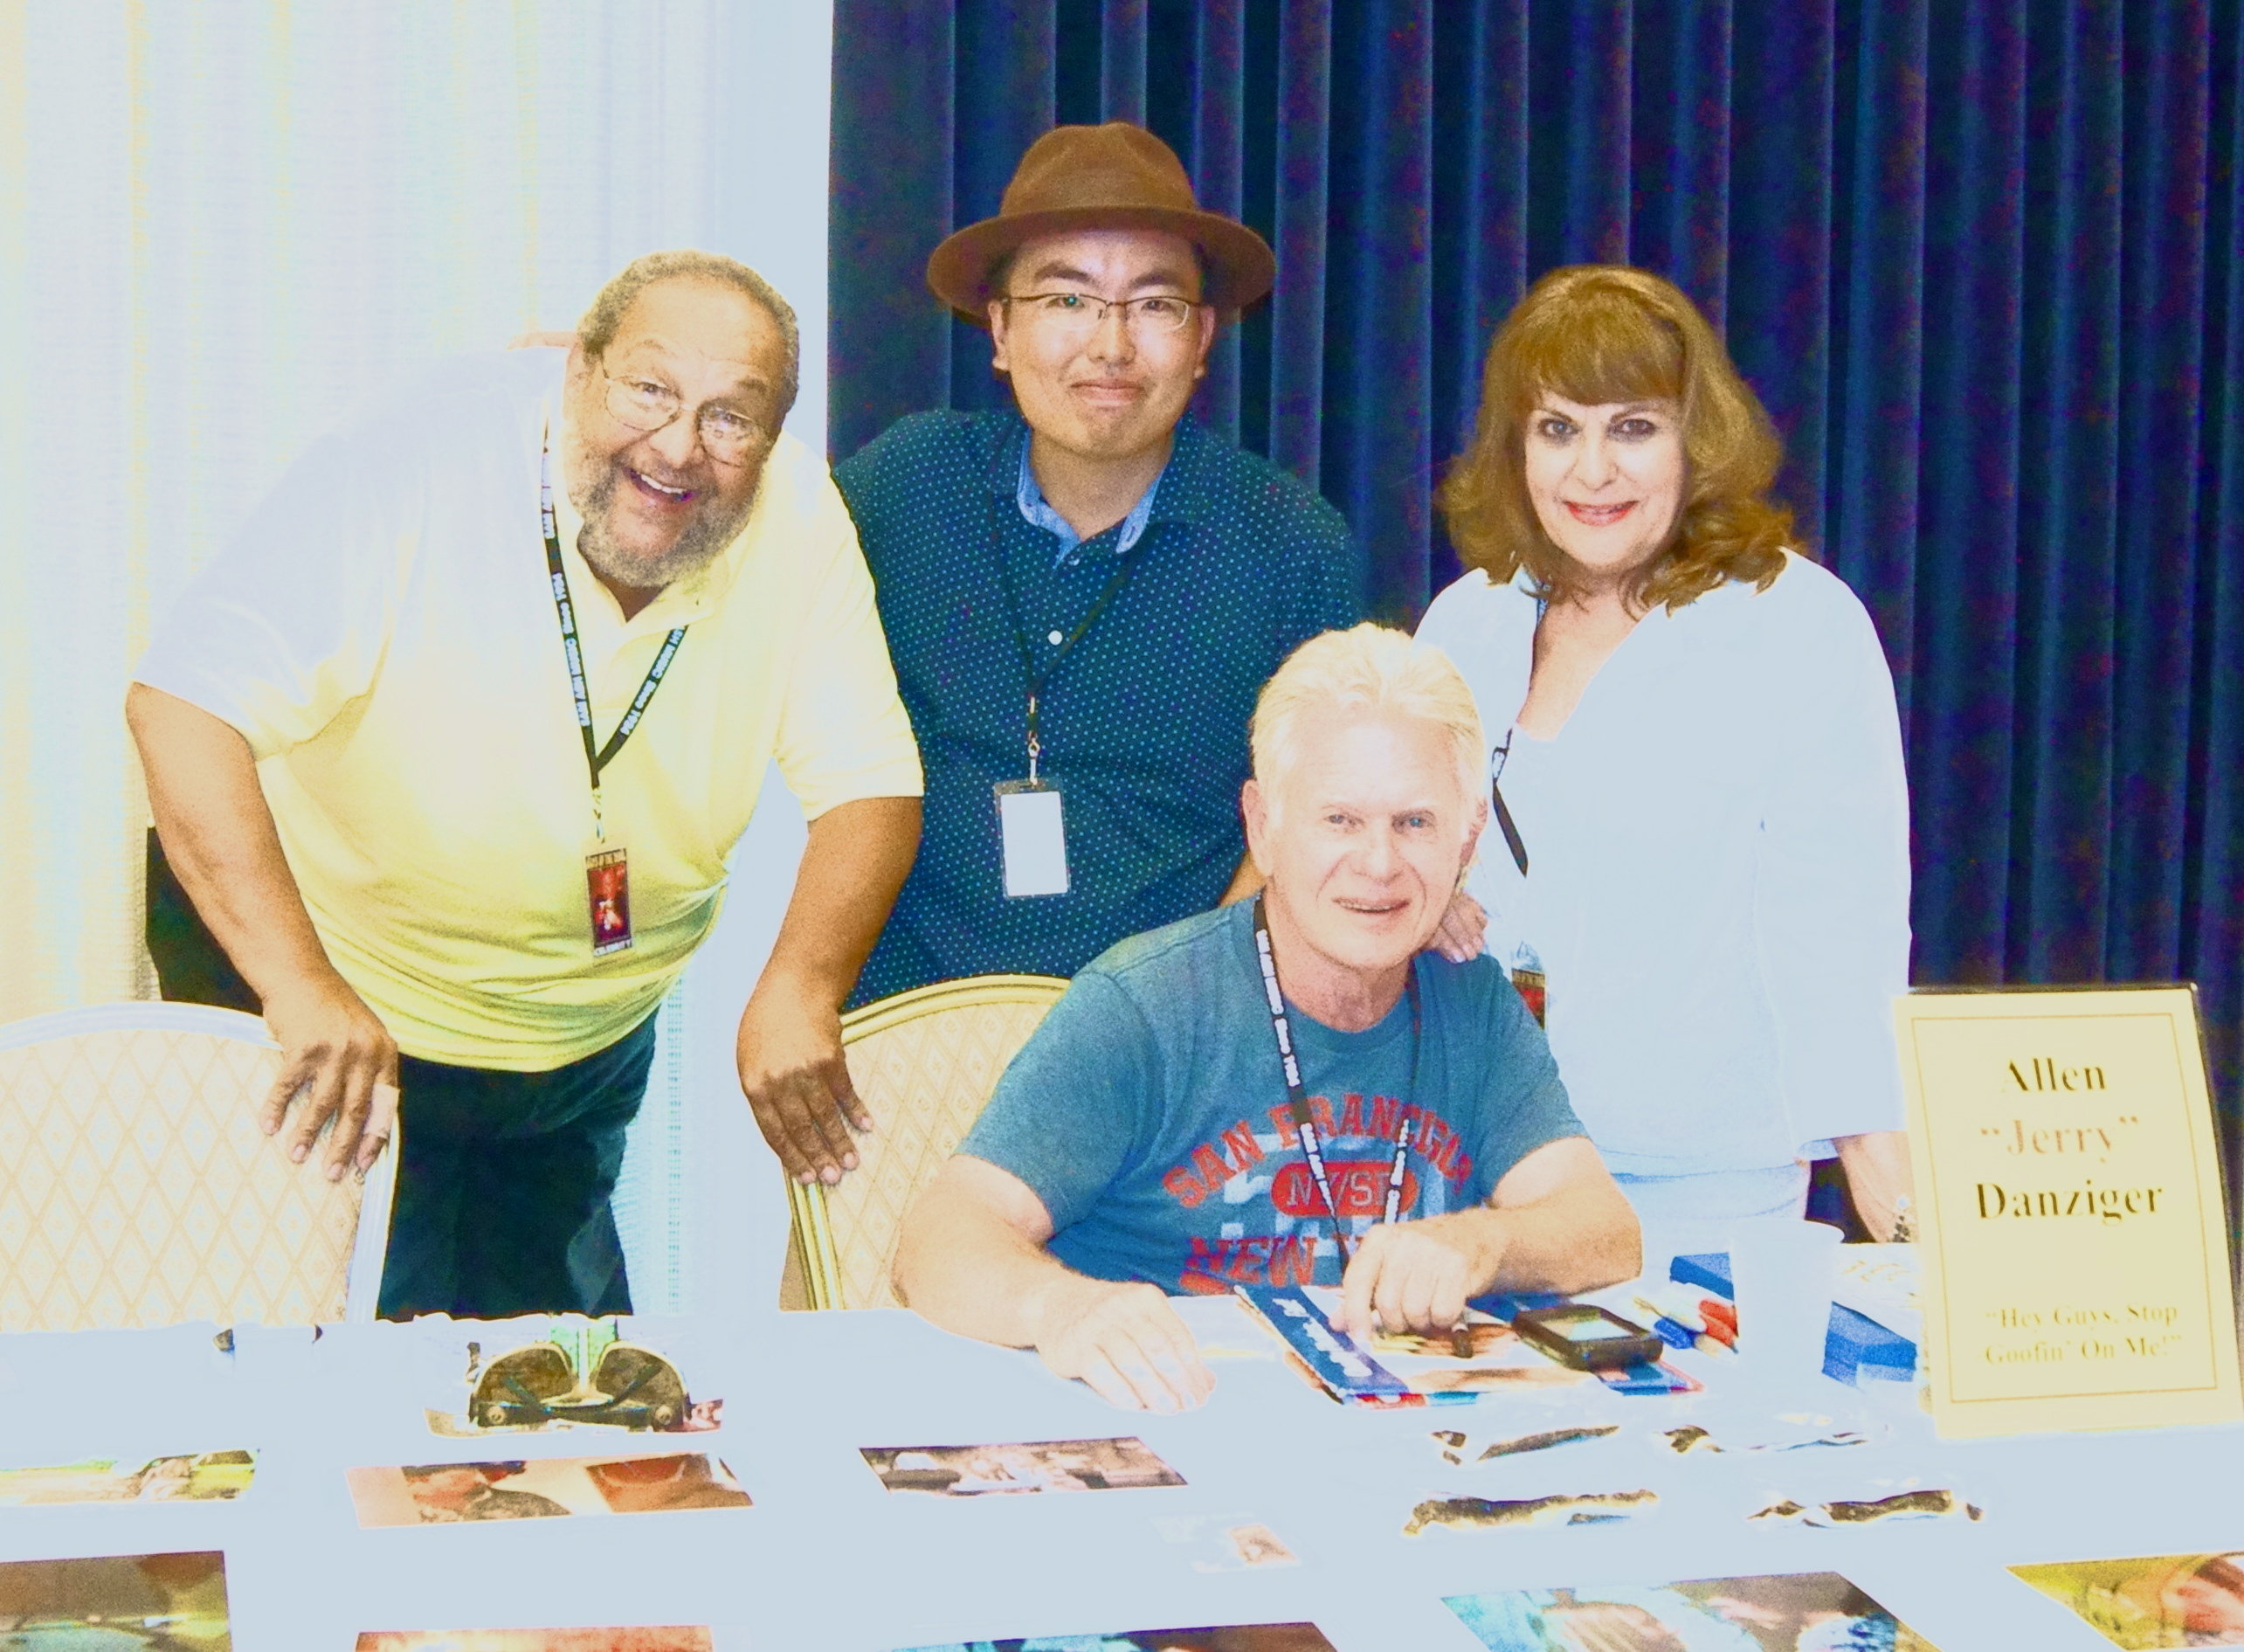 From the left, ''Cattle Truck Driver'' Ed Guinn, ''Corman Award Winning Filmmaker'' Ryota Nakanishi, ''Jerry'' Allen Danziger and ''Pam''Teri McMinn from the TCM panel at Days of the Dead Indianapolis 2012.